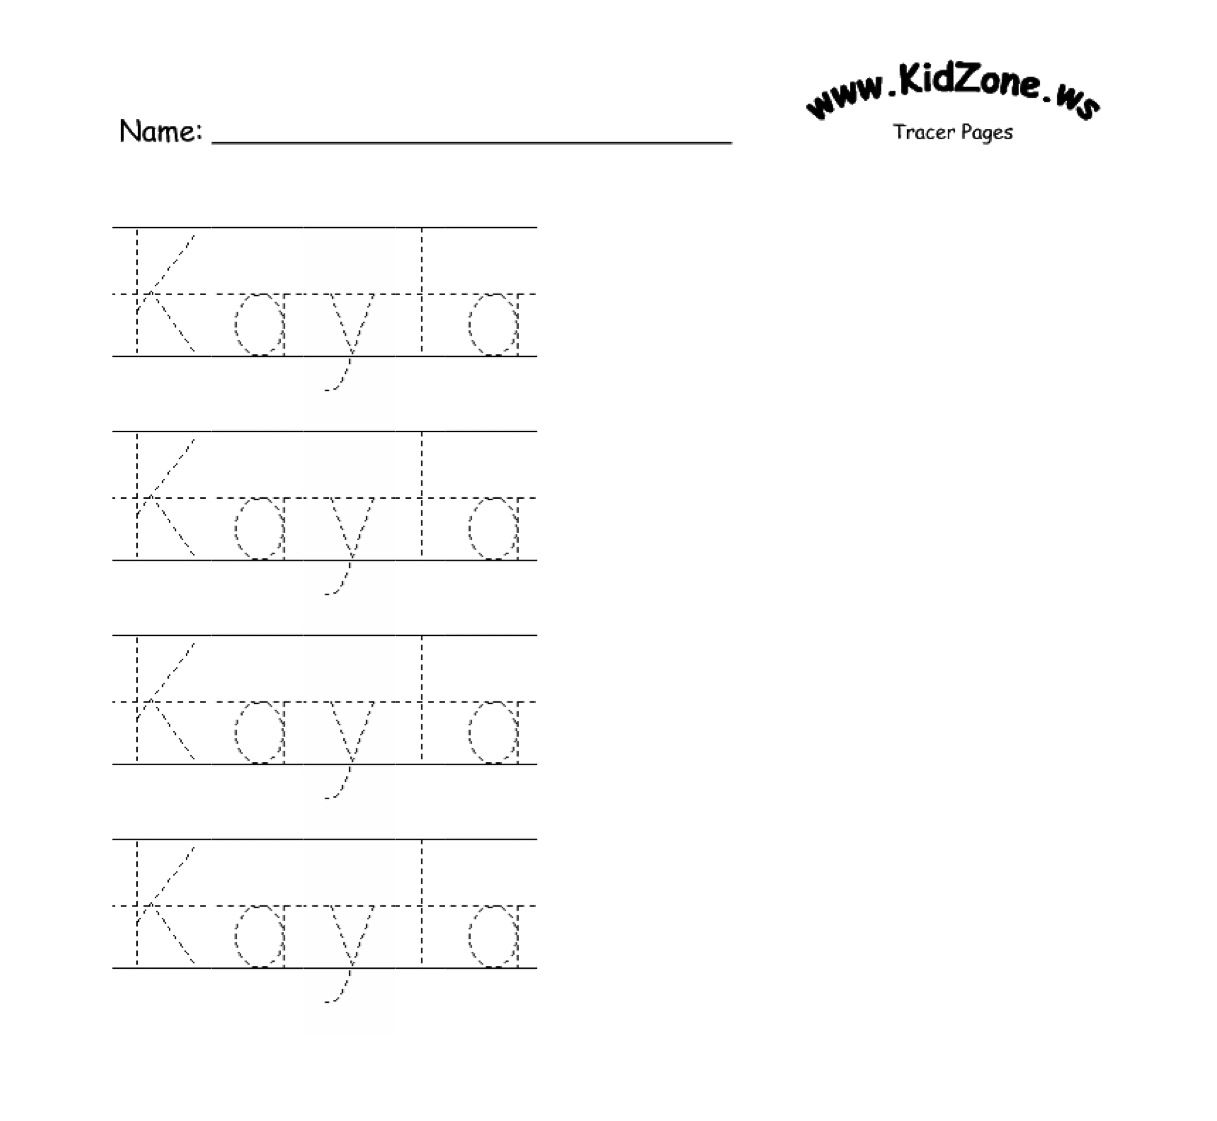 Custom Name Tracer Pages | Preschool Writing, Preschool intended for Name For Tracing